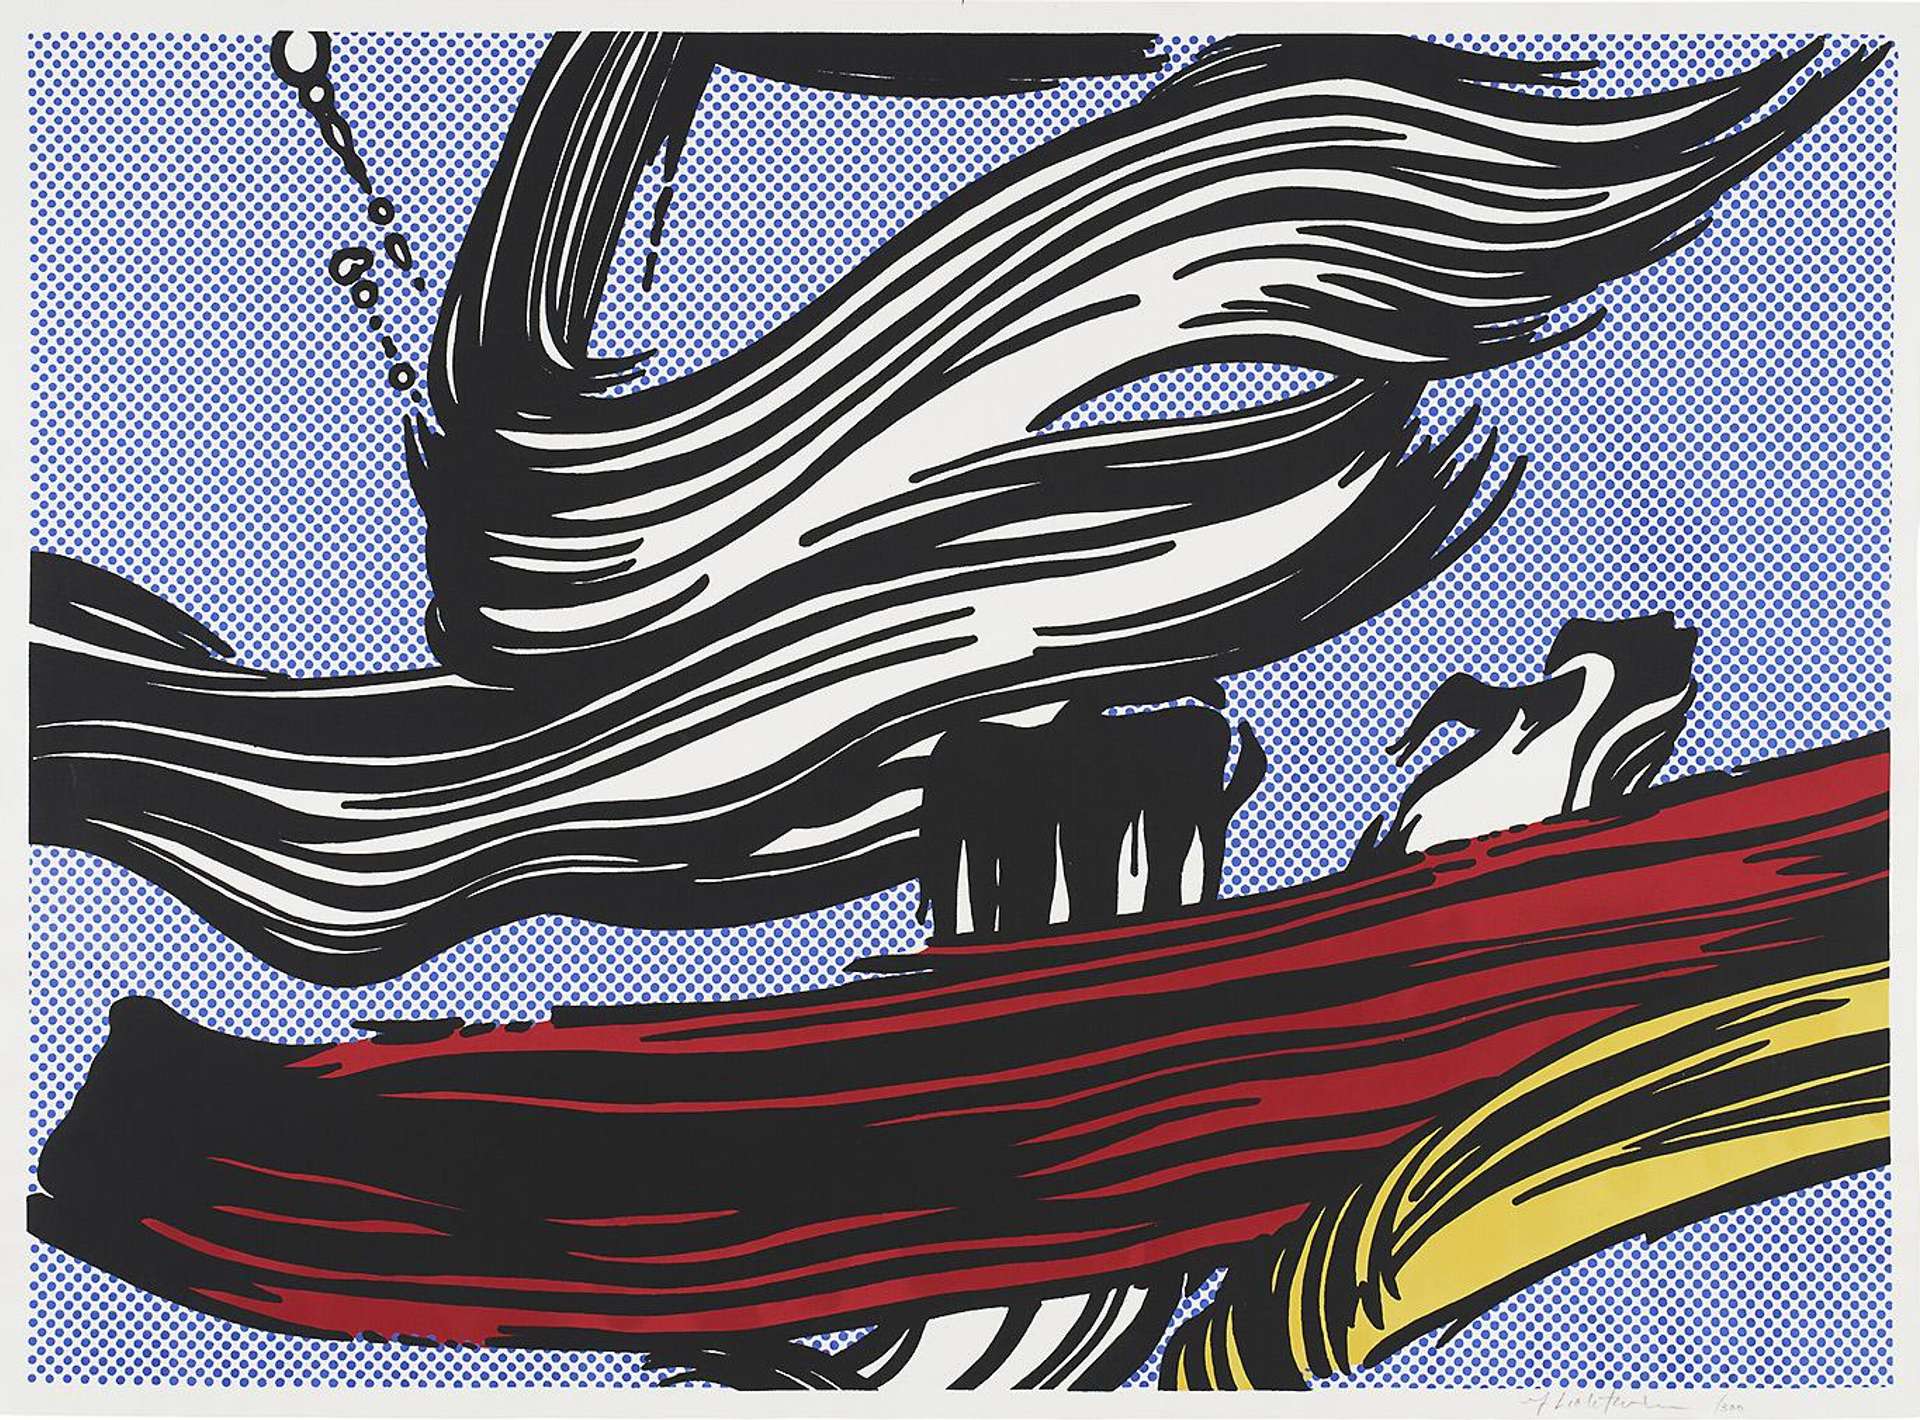 A screenprint by Roy Lichtenstein appropriating brushstrokes in white, red and yellow across the composition, with graphic black outlines.